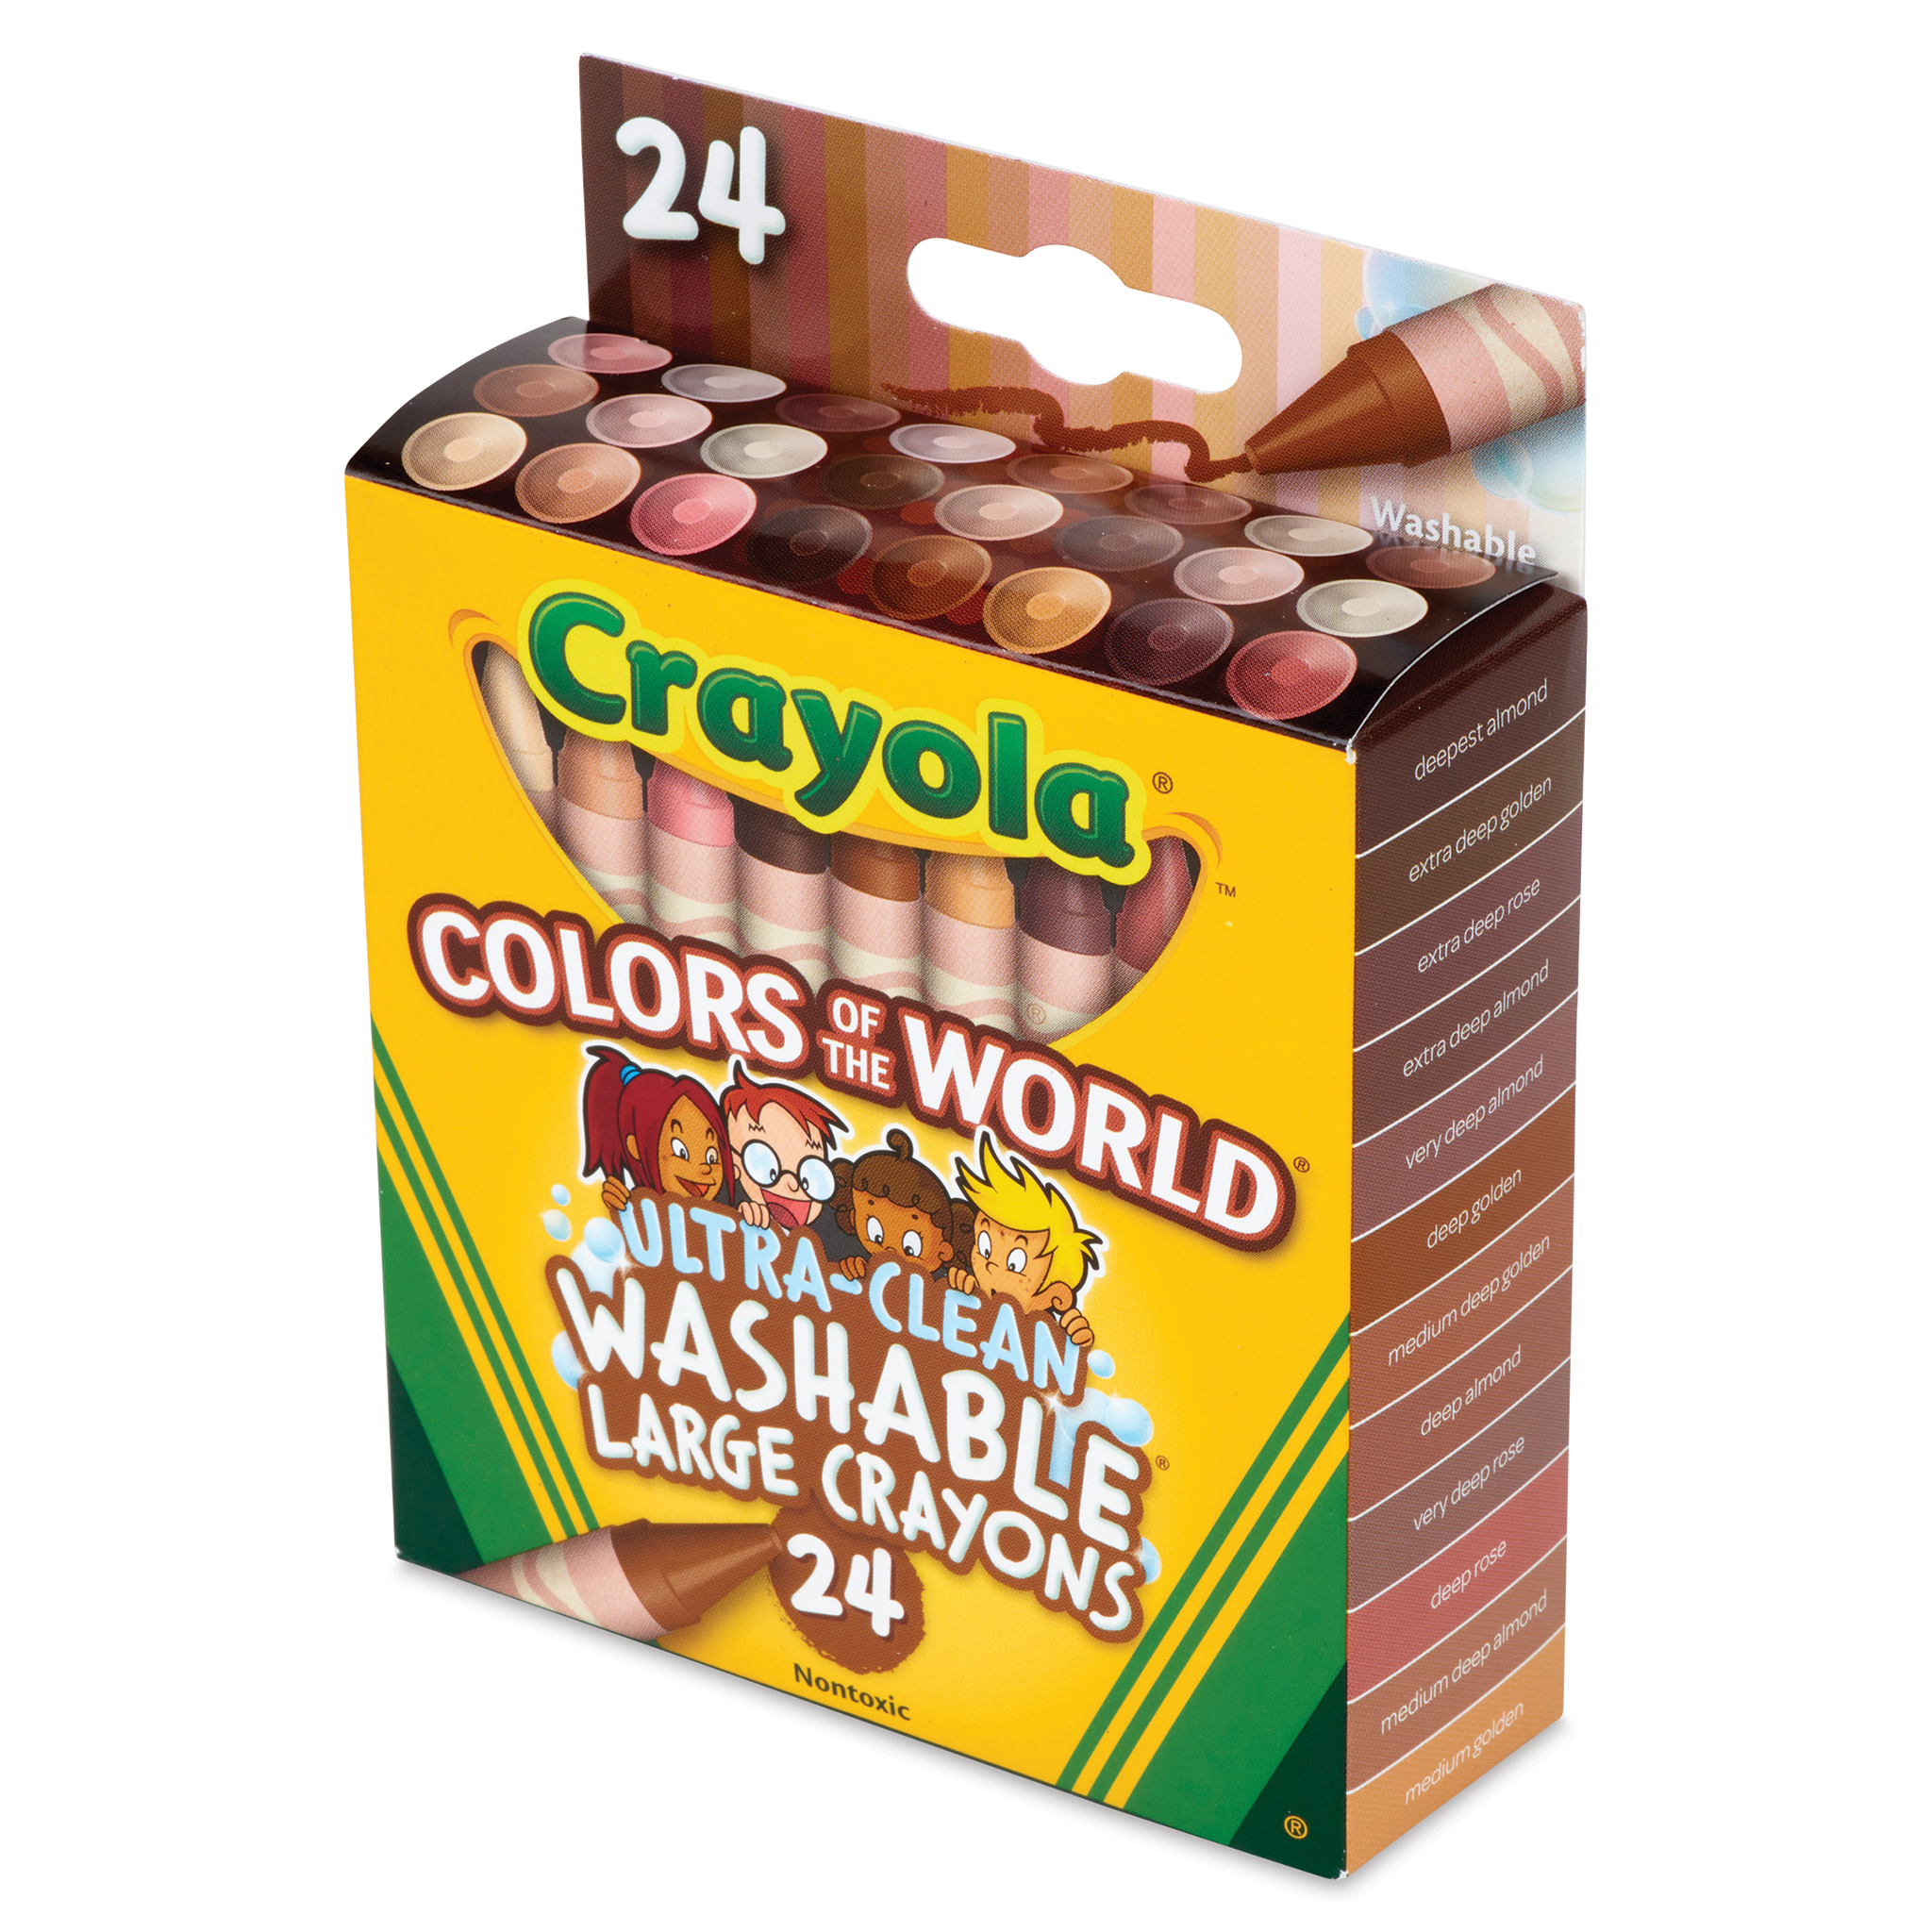 Large Crayons, Colors of the World, 24 Count - BIN520134, Crayola Llc